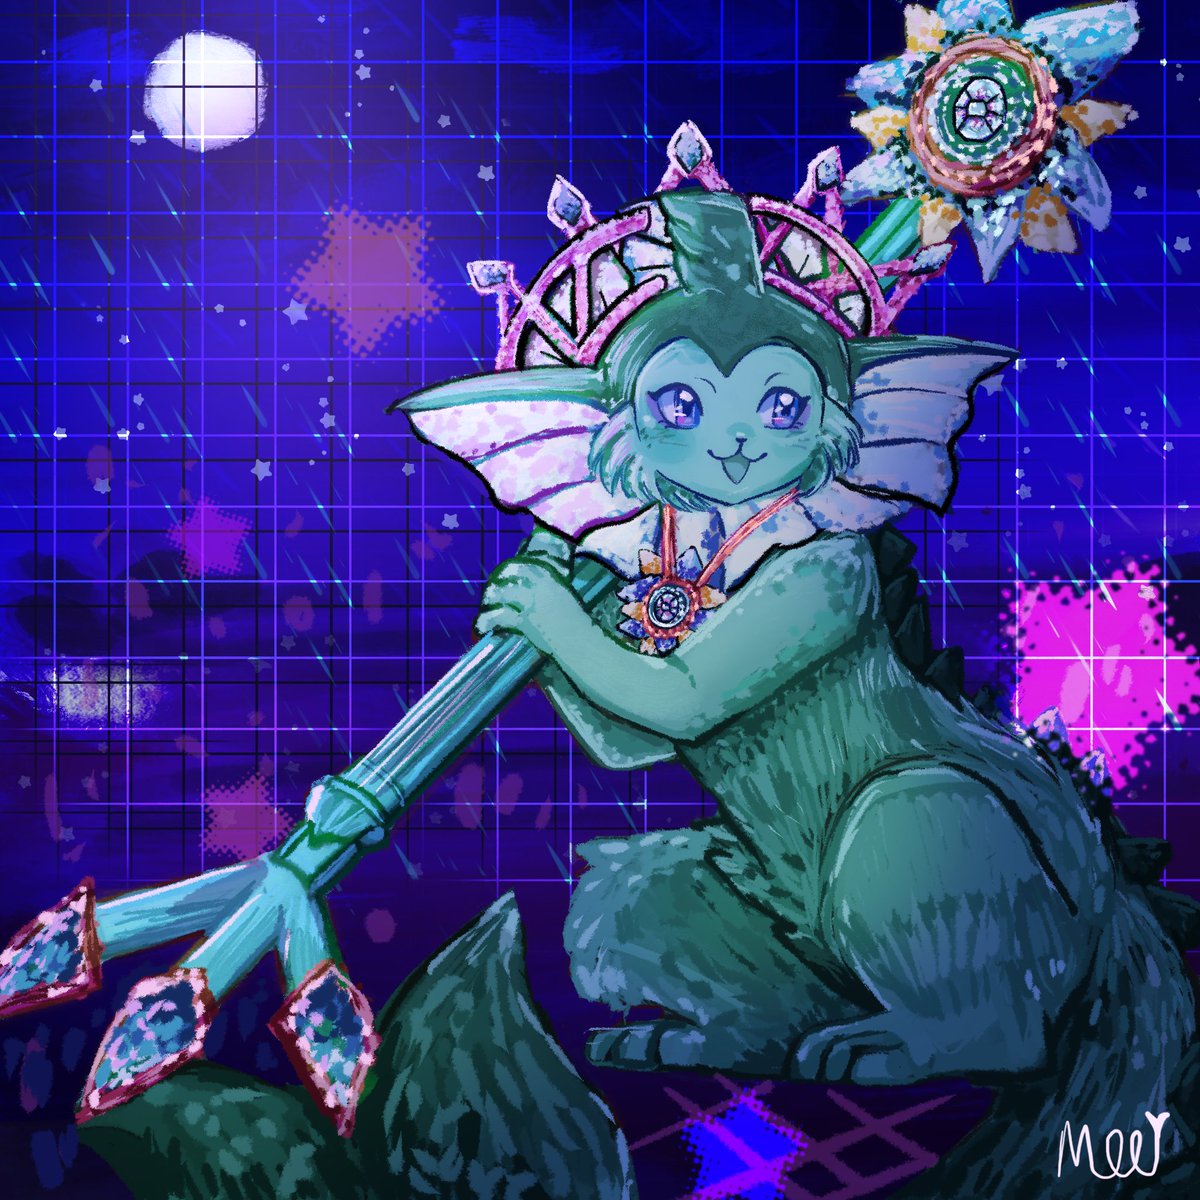 Hallo, I finished a request for @green_umbreon of their super cool Vaporeon oc Zaria! thank you so much for letting me draw them !! :3

#pokemonart #eeveeart #eeveelution #eevee #pokemon